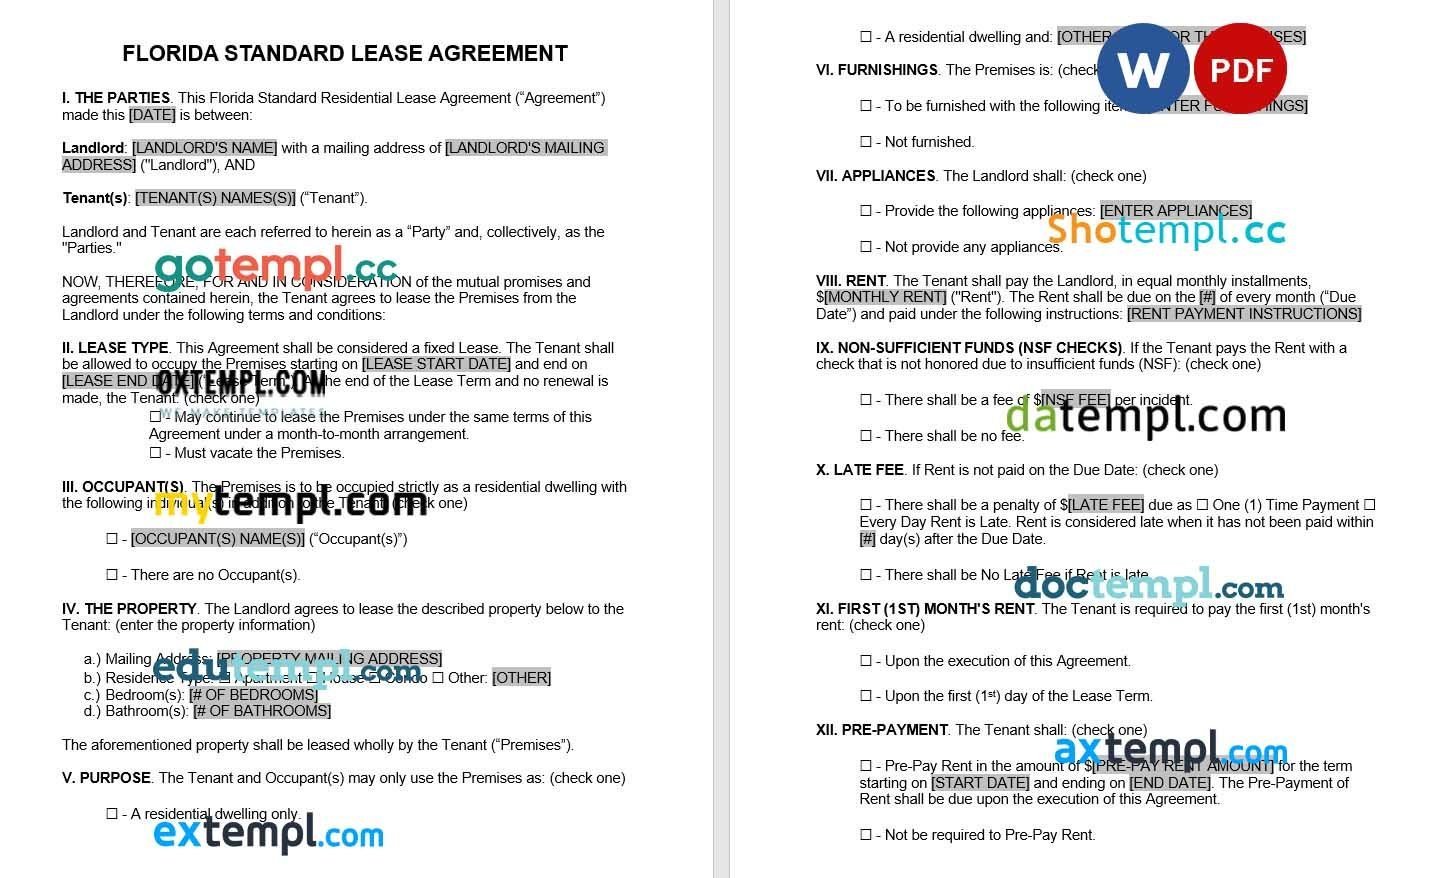 Florida Standard Residential Lease Agreement Word example